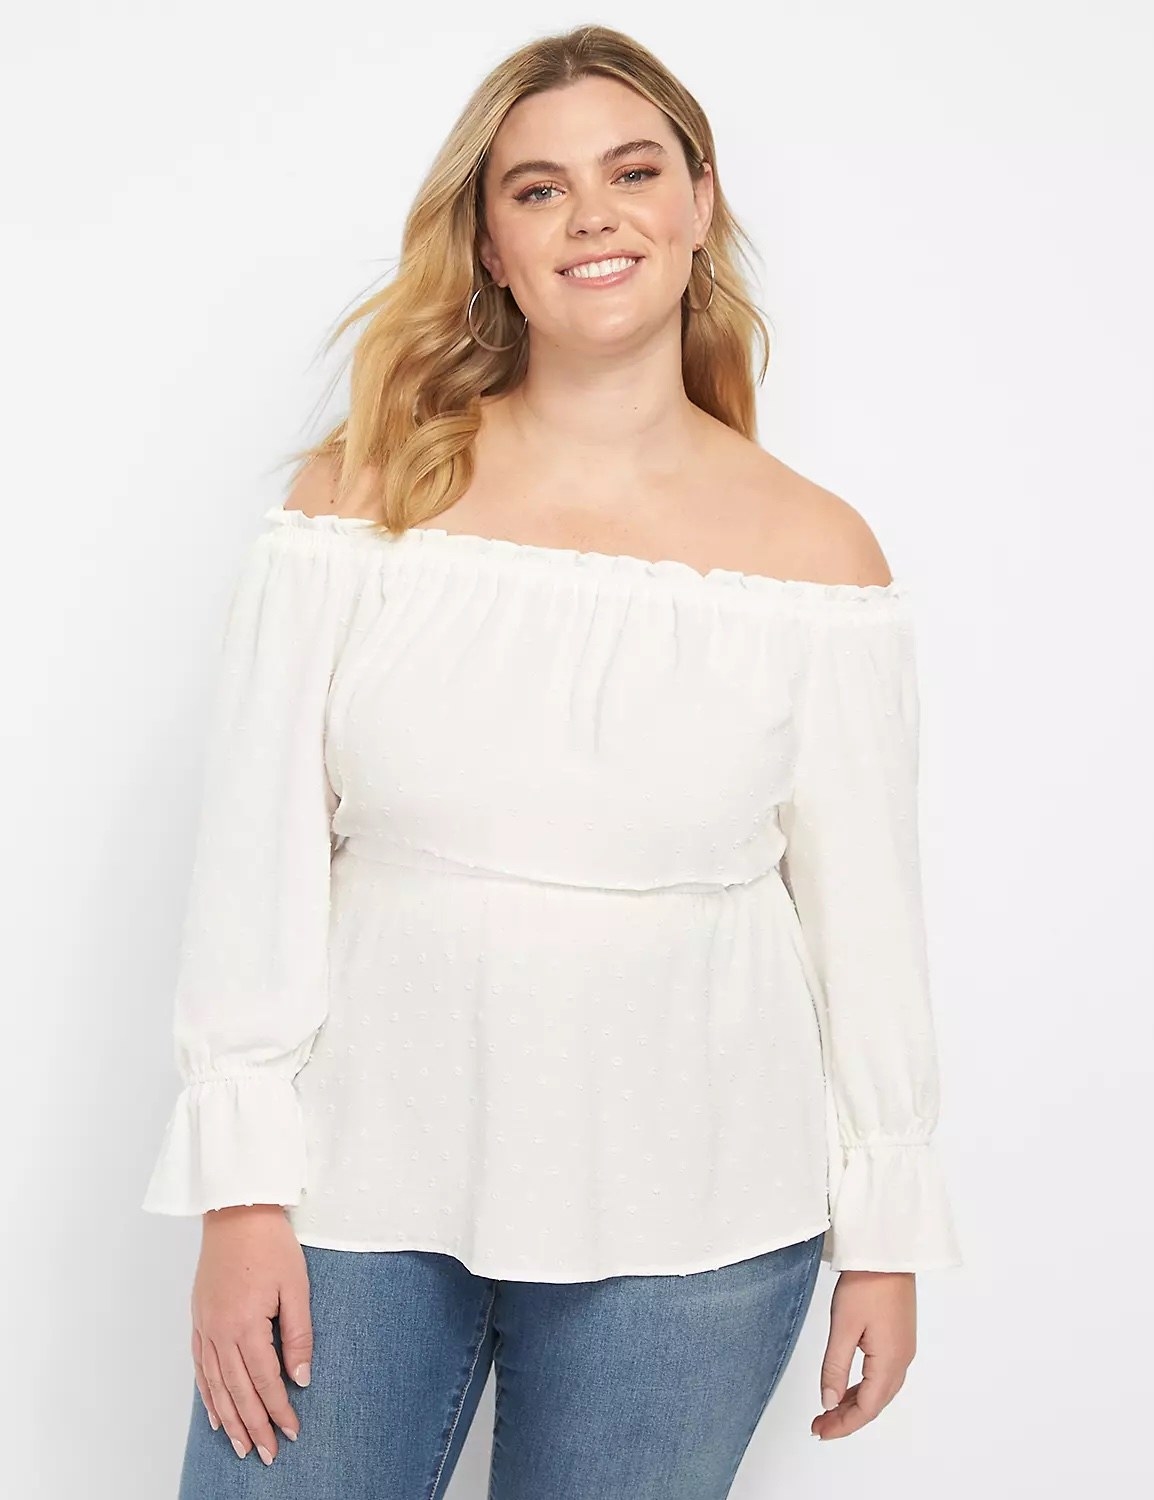 Model wearing off the shoulder long white top with blue jeans